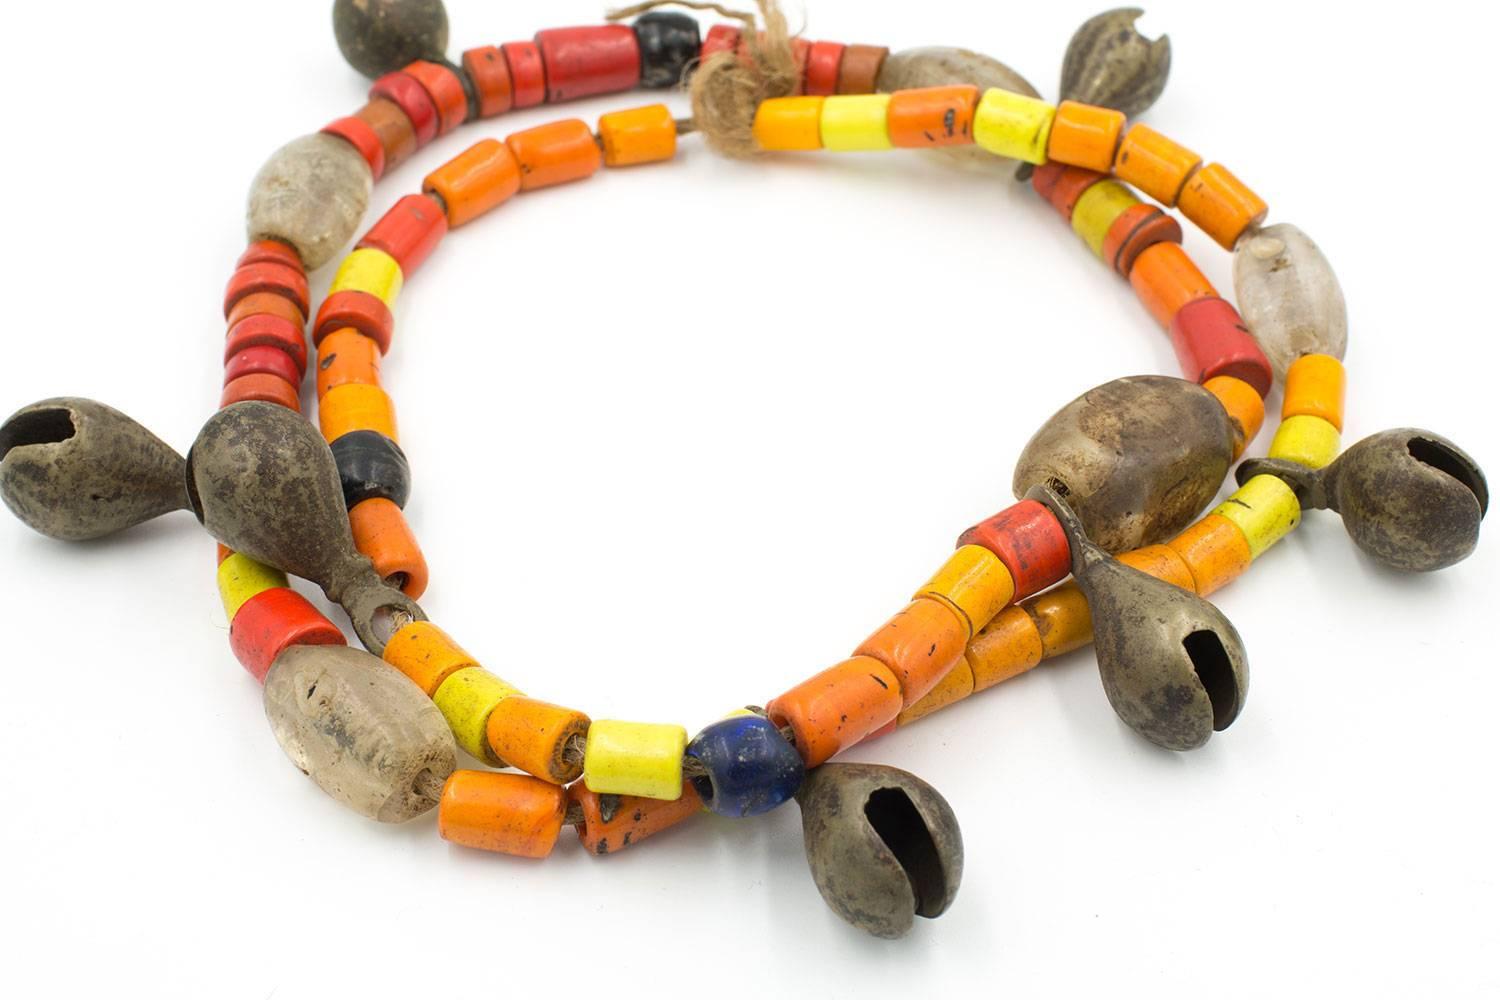 A wonderful old necklace from the Naga tribe . Made from old glass trade beads and hand-wrought brass bells, this necklace is an authentic piece of tribal jewelry.